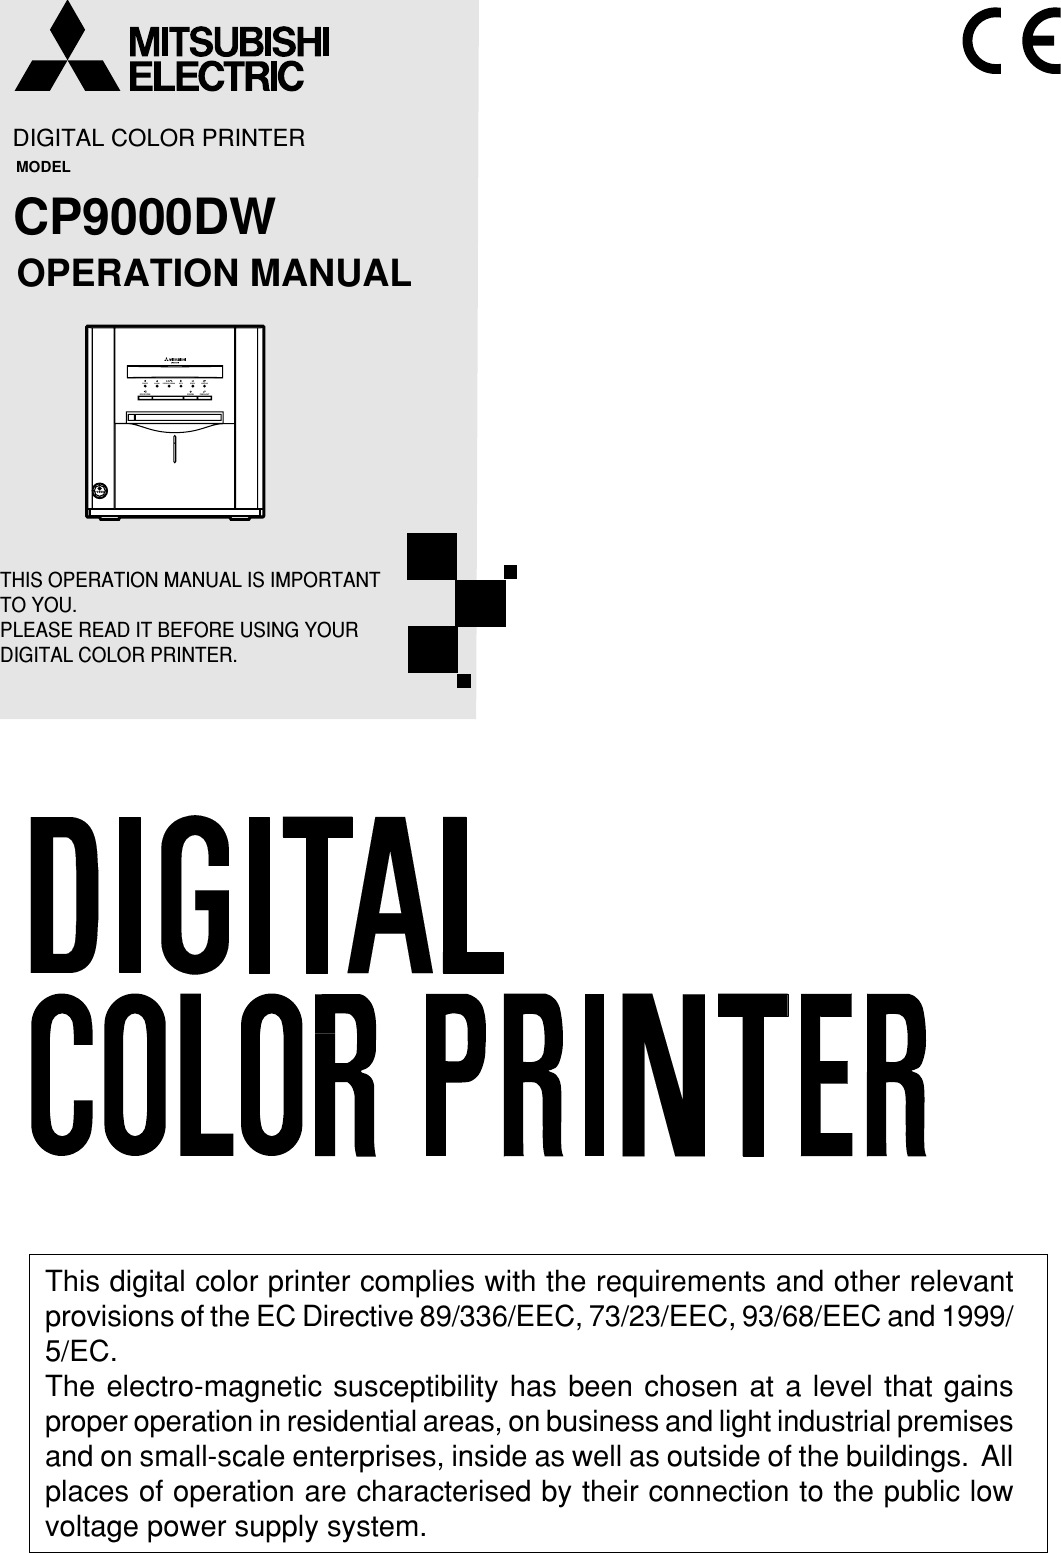 DIGITAL COLOR PRINTERMODELCP9000DWOPERATION MANUALTHIS OPERATION MANUAL IS IMPORTANT TO YOU.PLEASE READ IT BEFORE USING YOUR DIGITAL COLOR PRINTER.POWERALARMPAPER/INK RIBBONDATAREADYCANCELDOOR OPEN FEED&amp;CUTCOOLINGThis digital color printer complies with the requirements and other relevantprovisions of the EC Directive 89/336/EEC, 73/23/EEC, 93/68/EEC and 1999/5/EC.The electro-magnetic susceptibility has been chosen at a level that gainsproper operation in residential areas, on business and light industrial premisesand on small-scale enterprises, inside as well as outside of the buildings.  Allplaces of operation are characterised by their connection to the public lowvoltage power supply system.